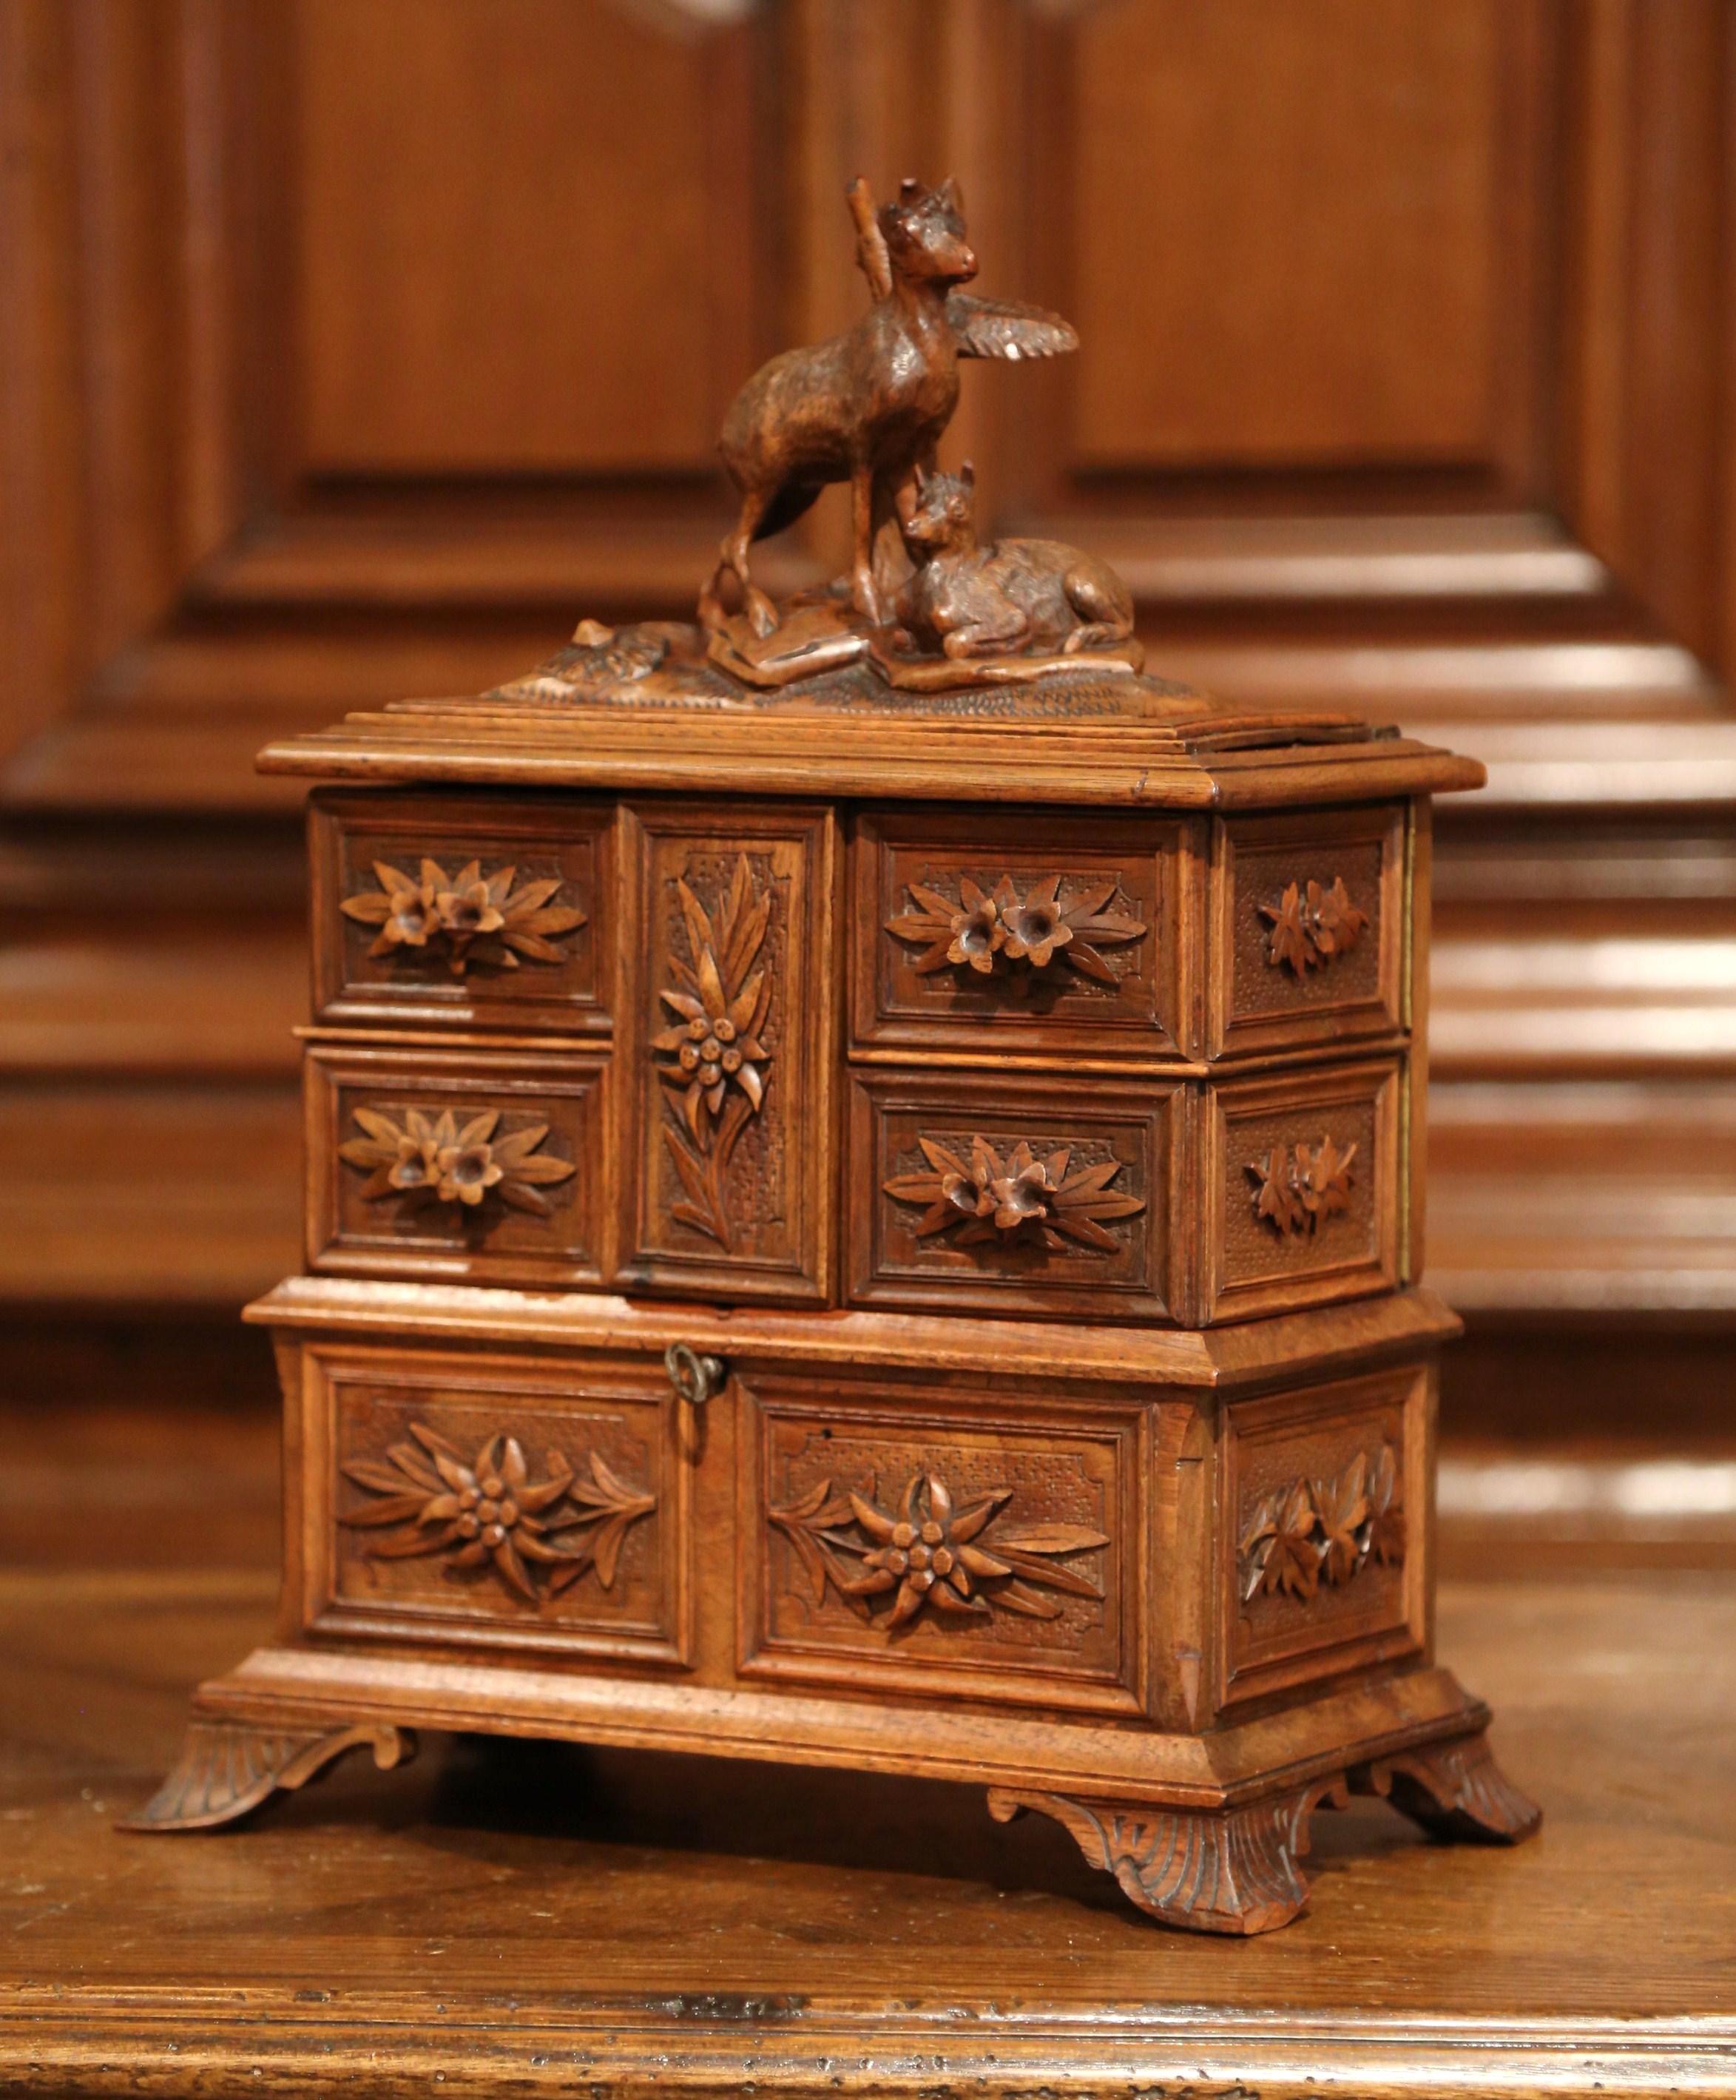 Hand-Carved 19th Century French Black Forest Carved Walnut Jewelry Box with Deer and Drawers